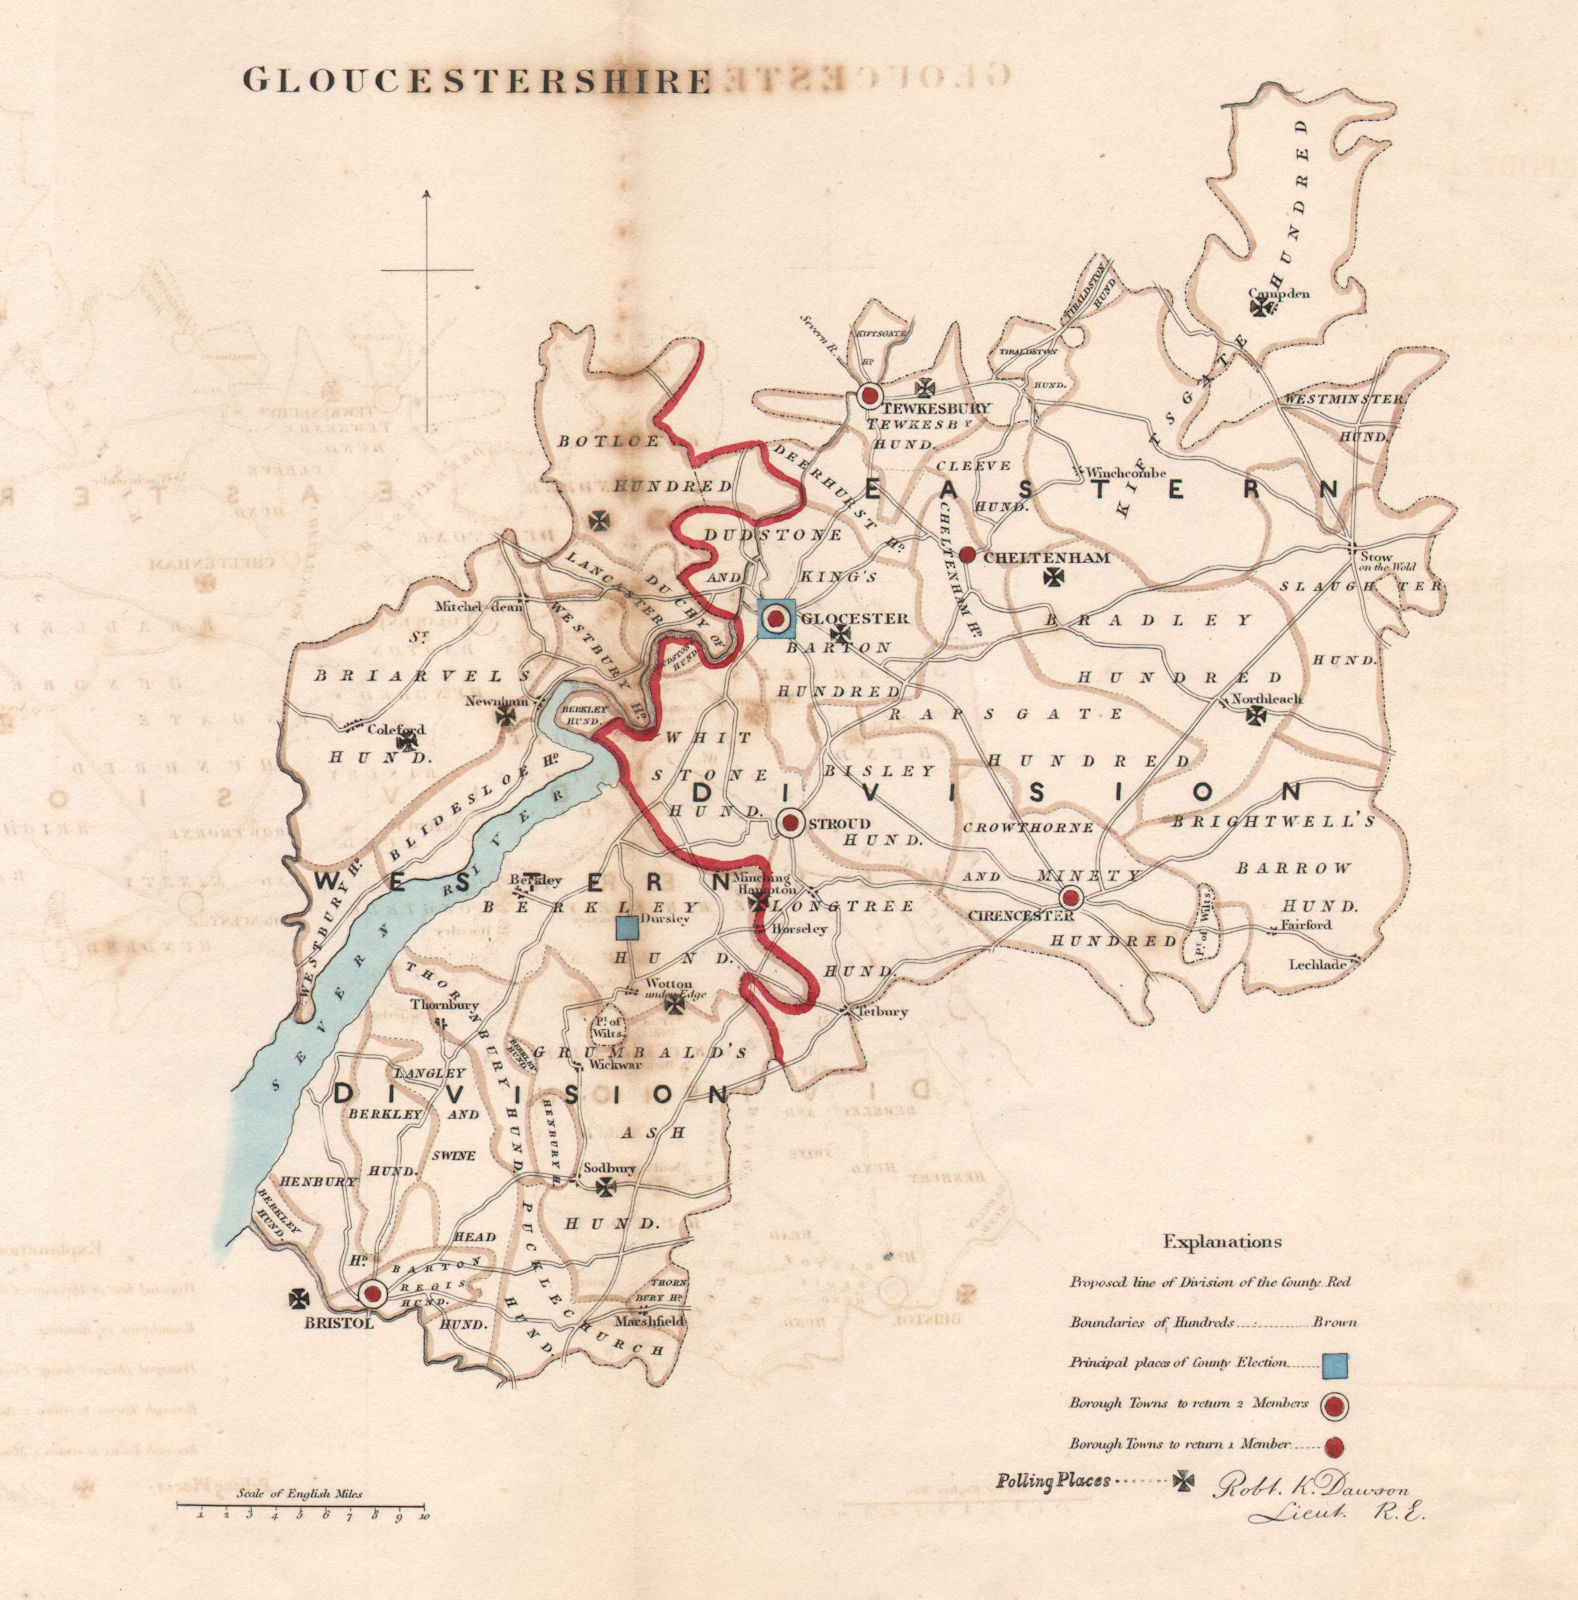 Associate Product Gloucestershire county map. Divisions electoral boroughs REFORM ACT. DAWSON 1832